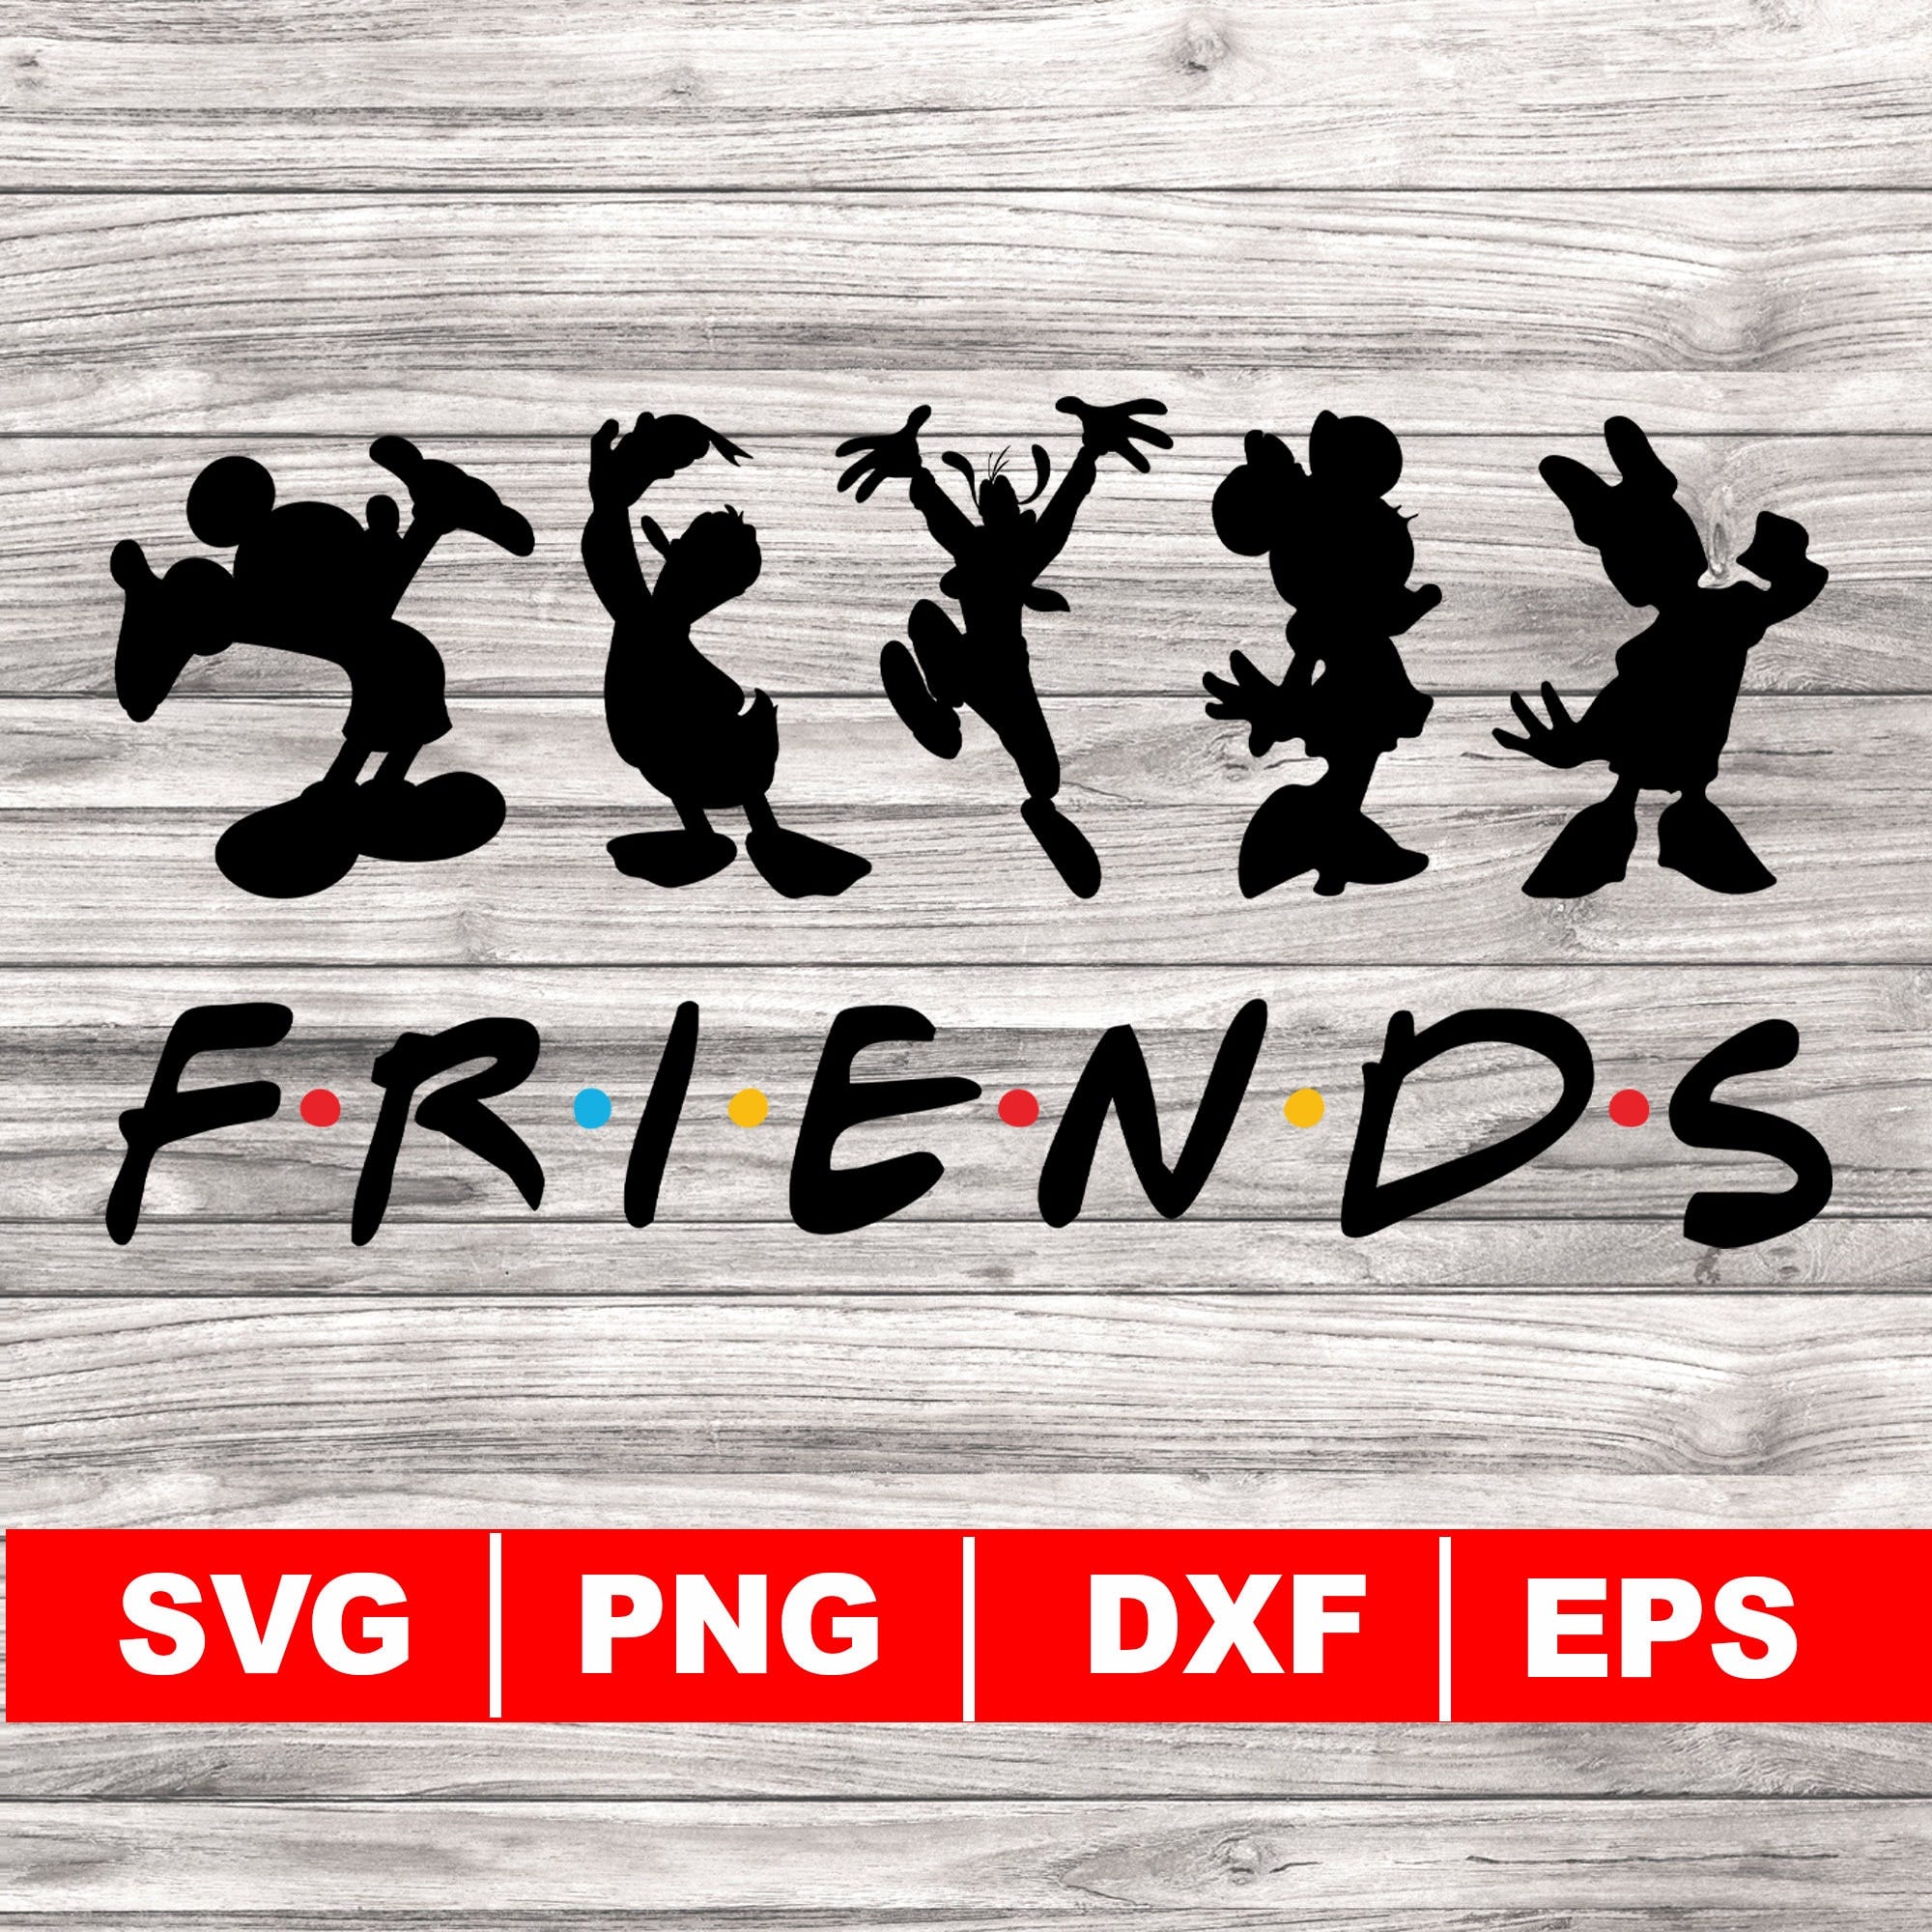 Friends svg, Silhouette mickey svg, Vinyl Projects, Digital Download, Silhouette donald svg, Silhouette minnie svg